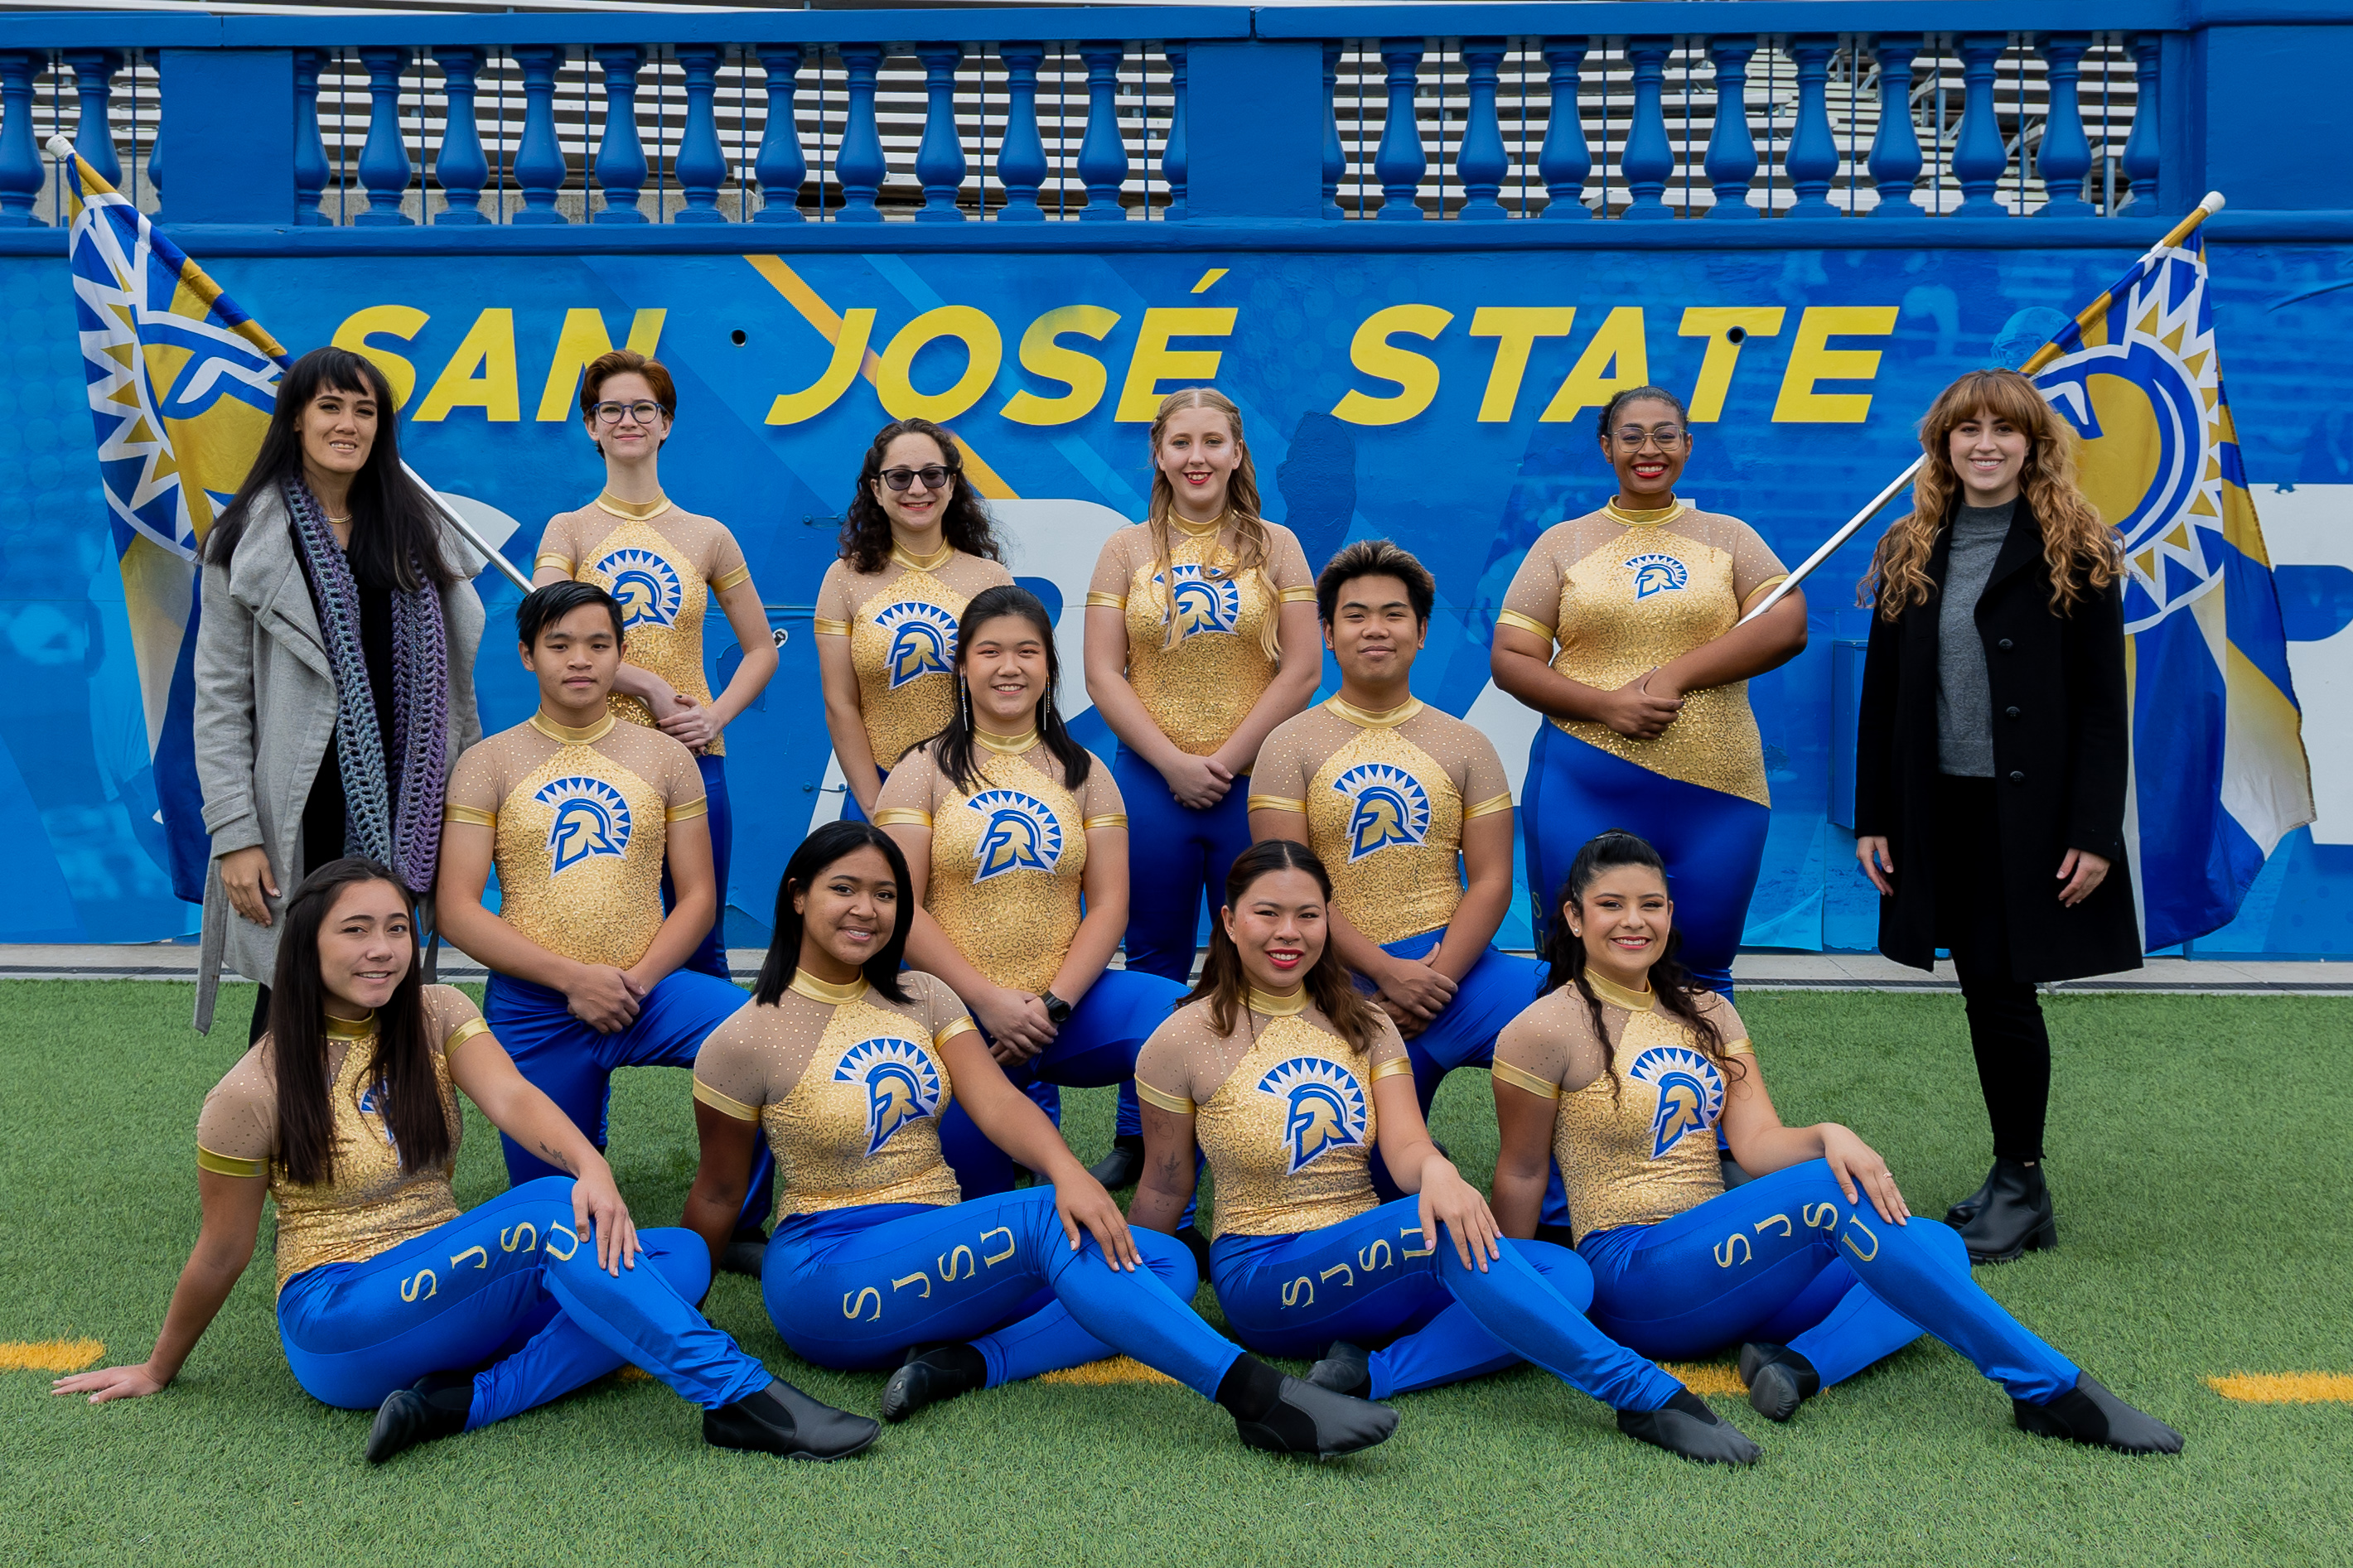 Section picture of the 2021 SJSU Color Guard